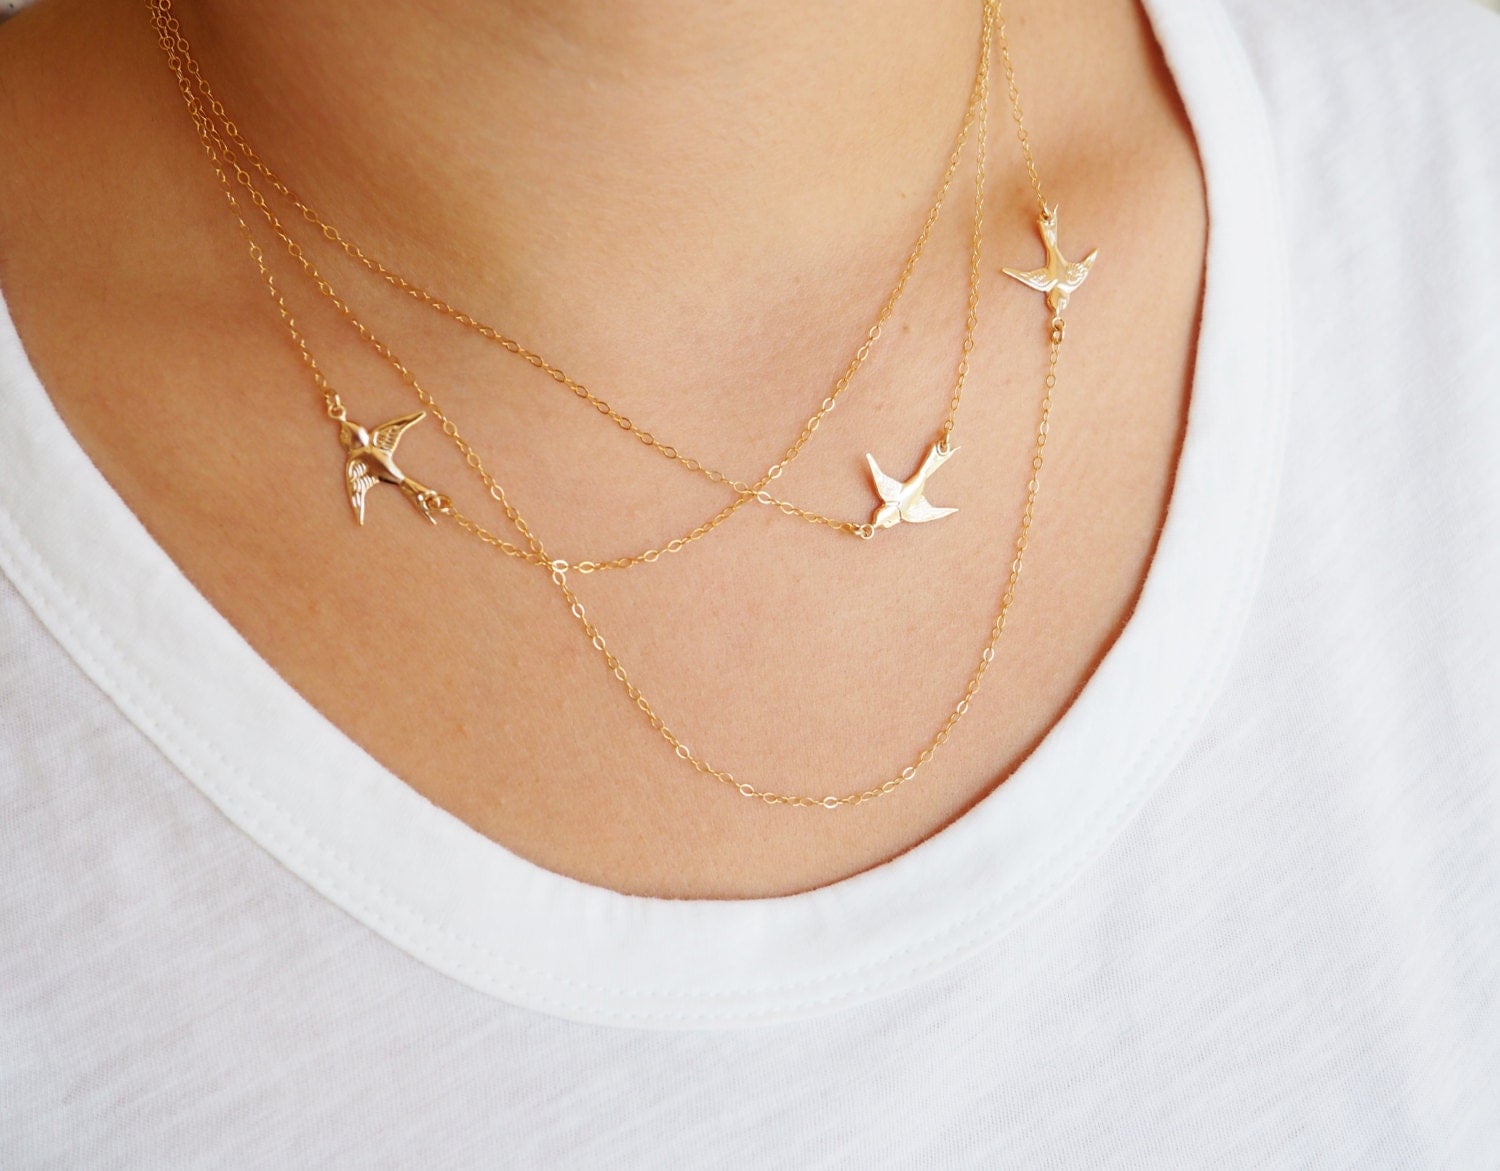 Download Flying Birds Necklace Three Layered Necklace Available in